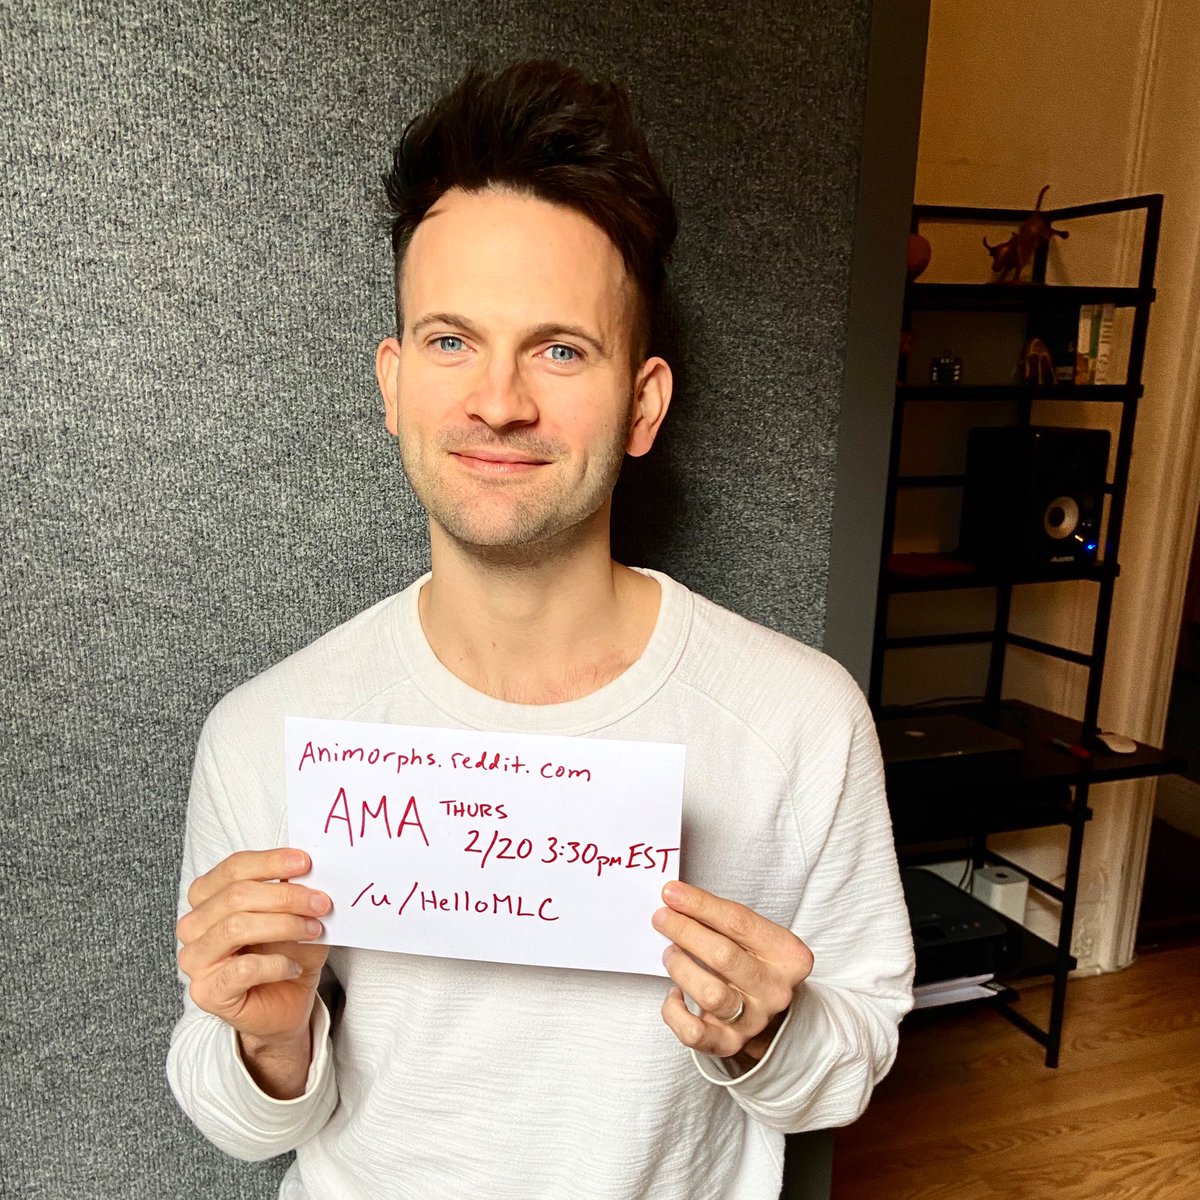 Today at 3:30pm EST I’ll be hosting an AMA (Ask Me Anything) on Reddit’s Animorphs subreddit! I voice the character of Tobias in the new #audiobooks for @Scholastic, written by @kaaauthor. (I learned how Reddit works just for this 🙃) #RedditAMA #animorphs